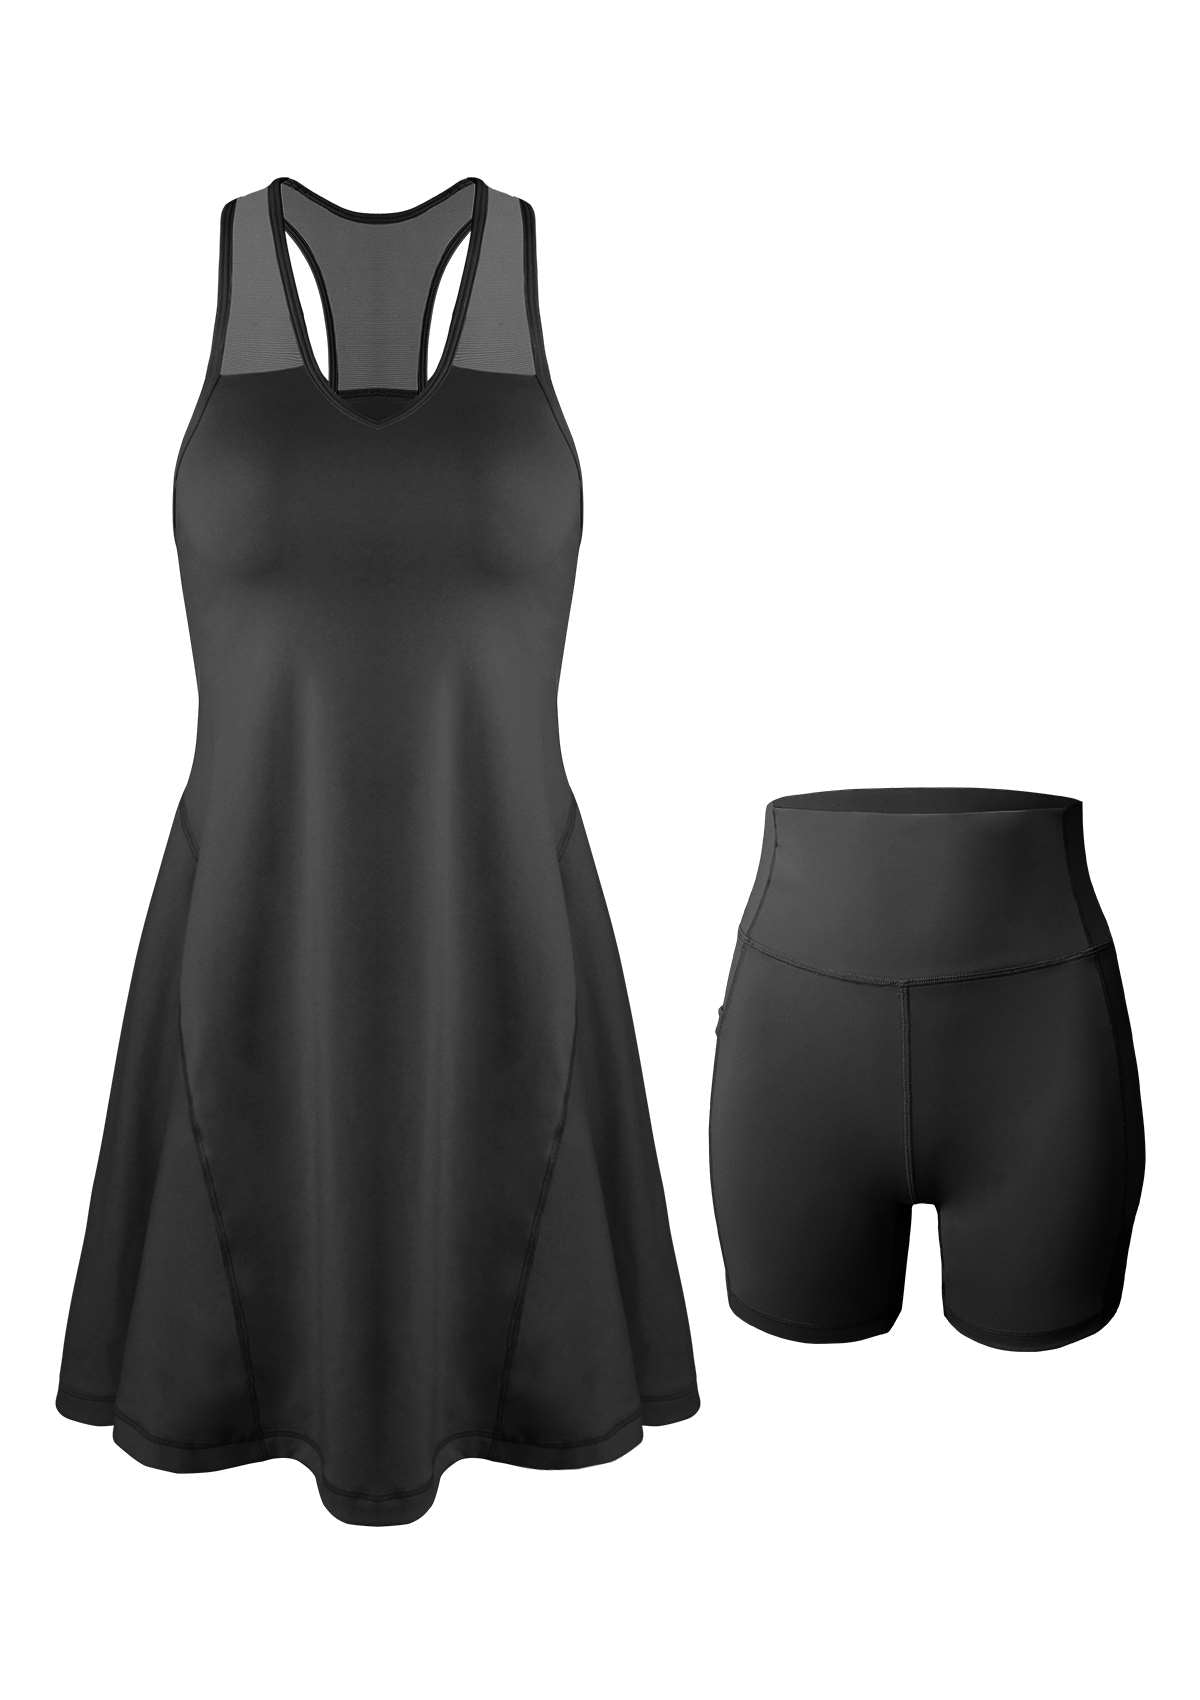 SONGFUL On The Move Sports Dress With Shorts Set - M / Black